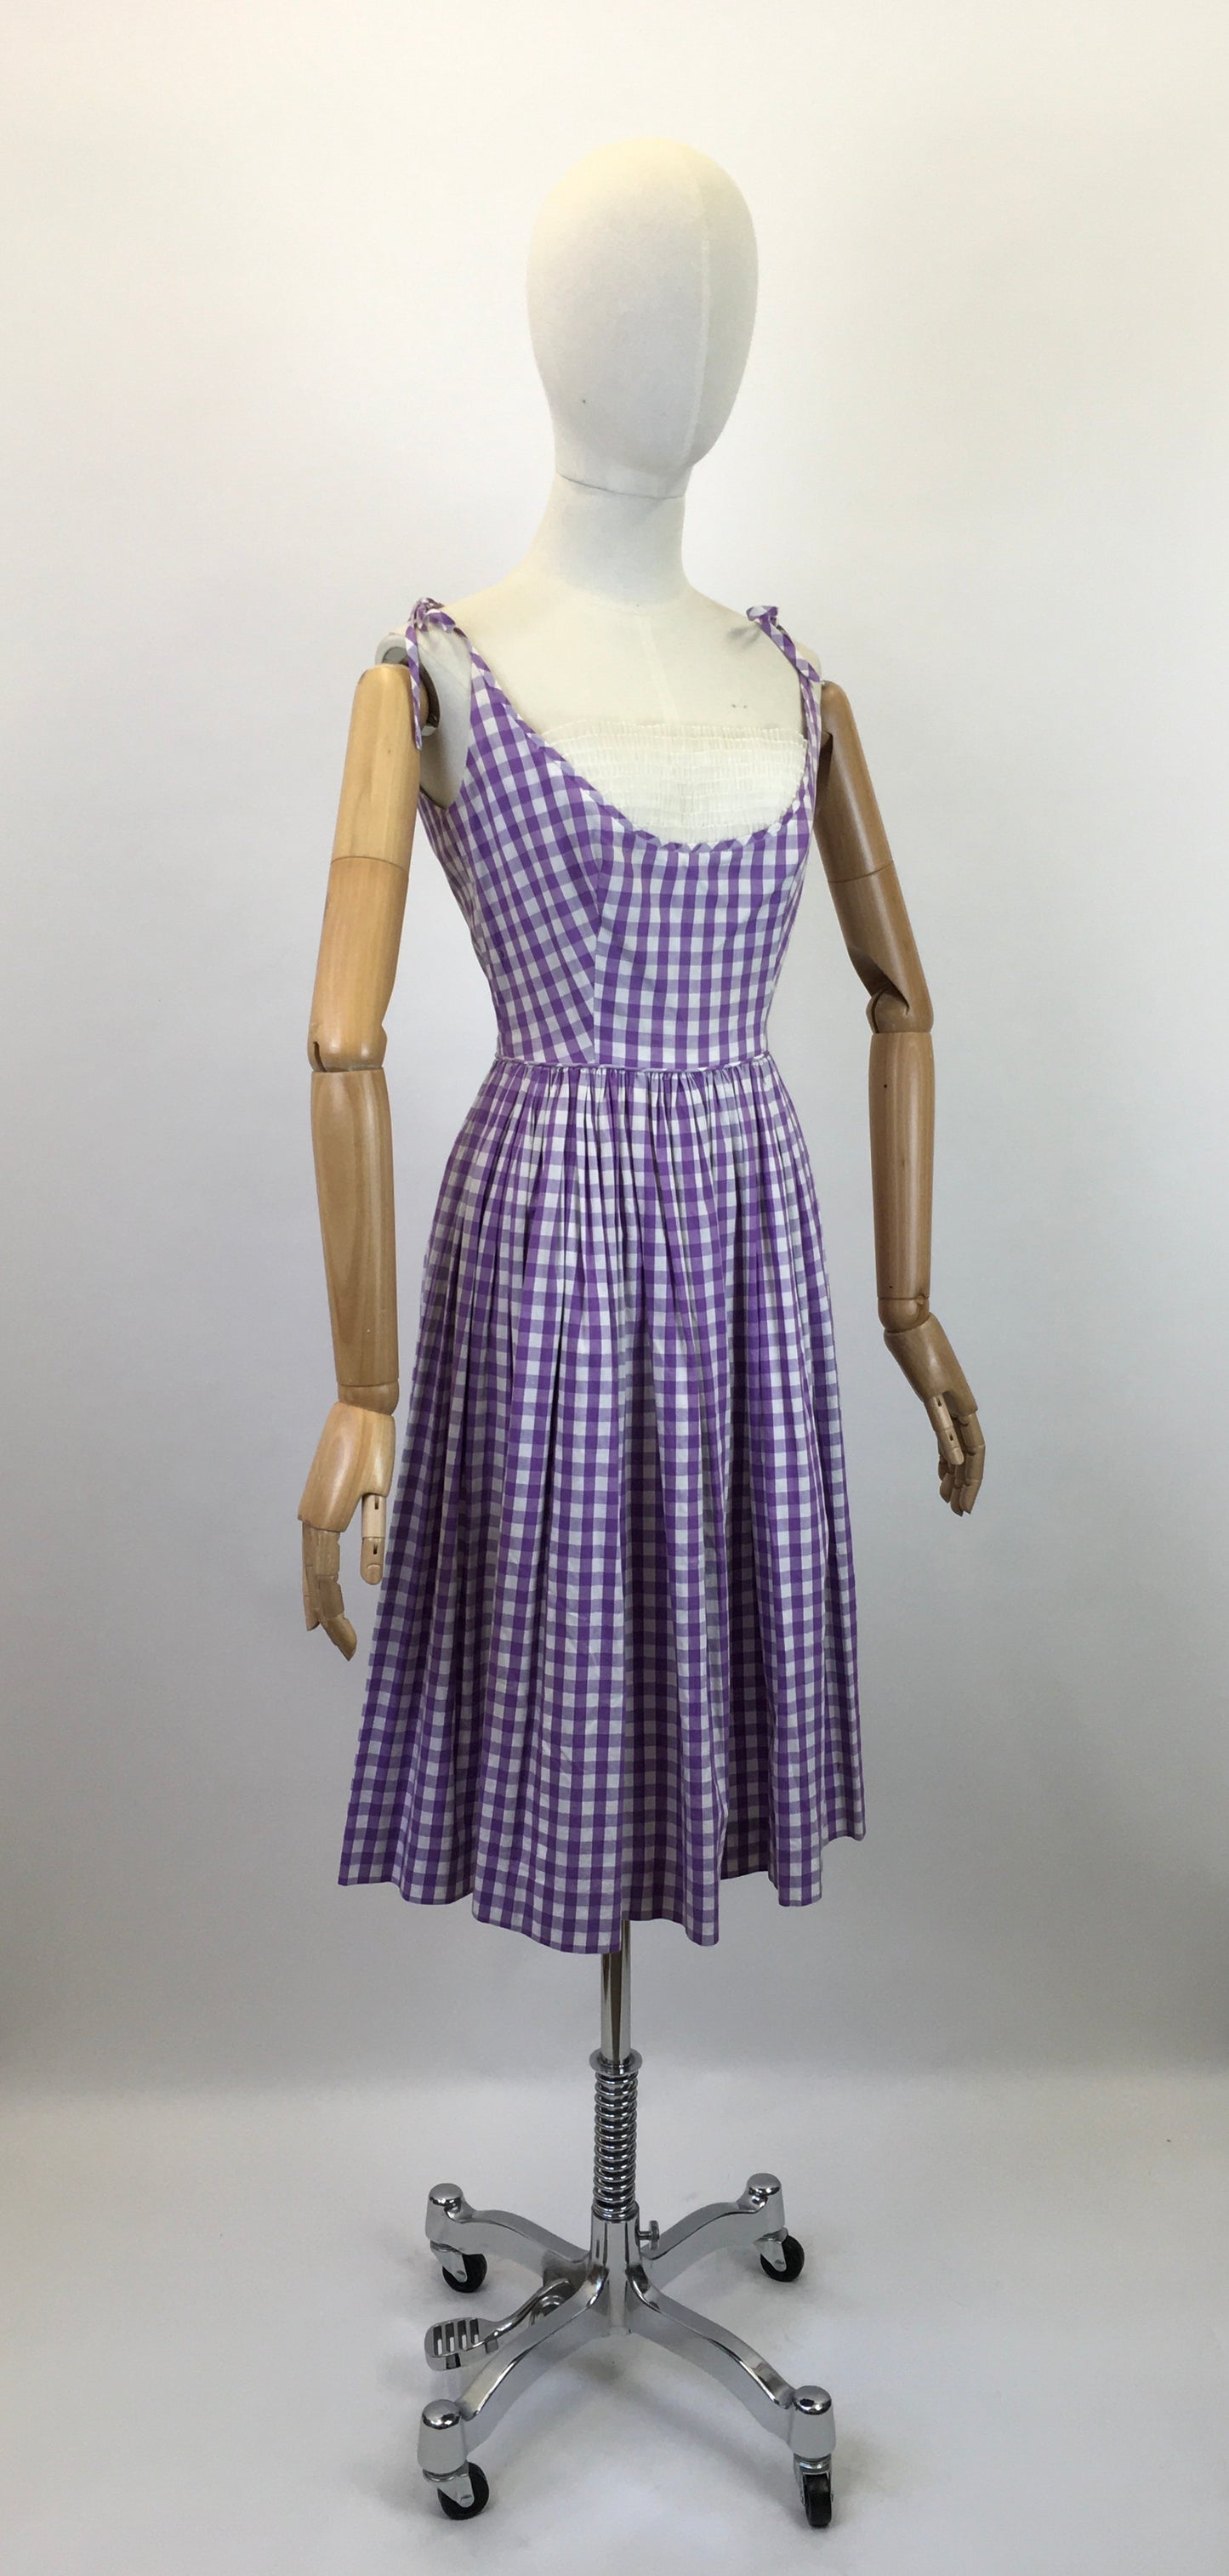 Original 1950's Darling ' Sambo Fashions' Frock - In A Beautiful Purple and White Gingham